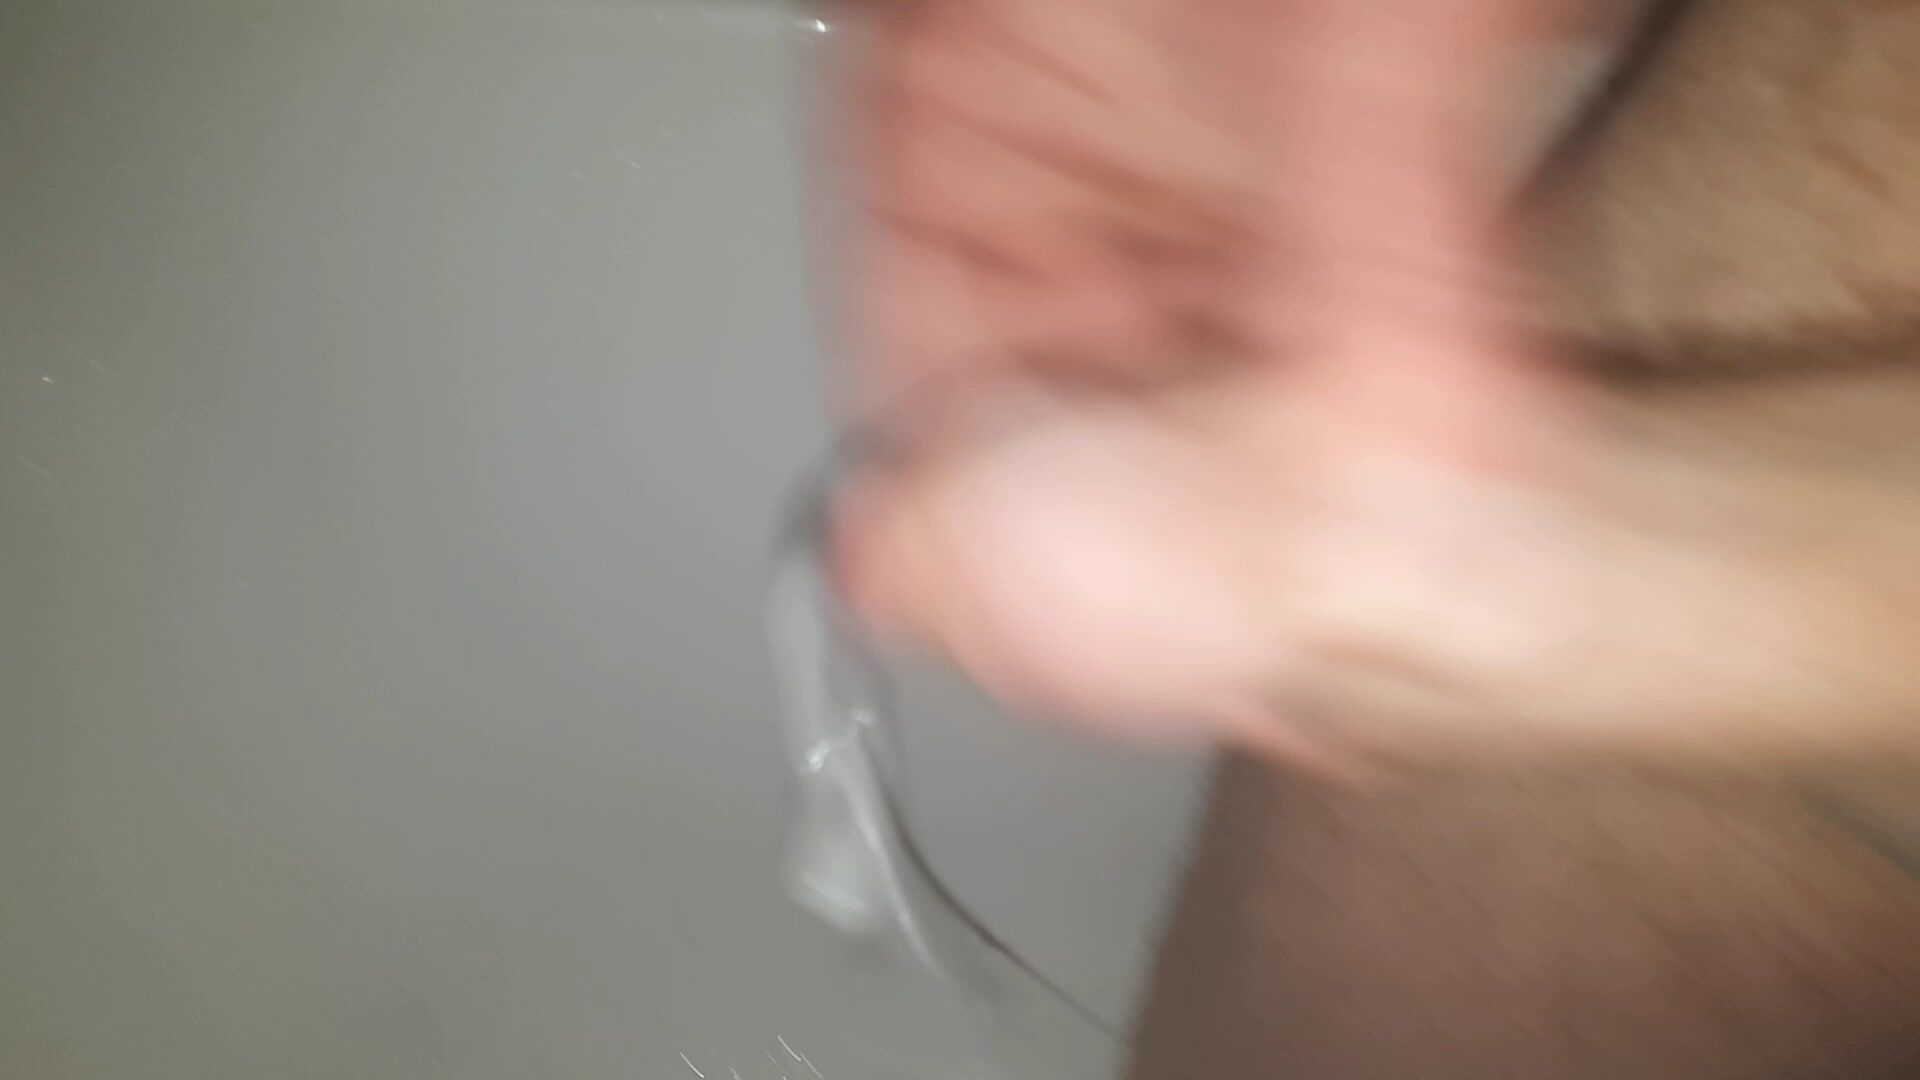 my uncut cock shooting its load #8